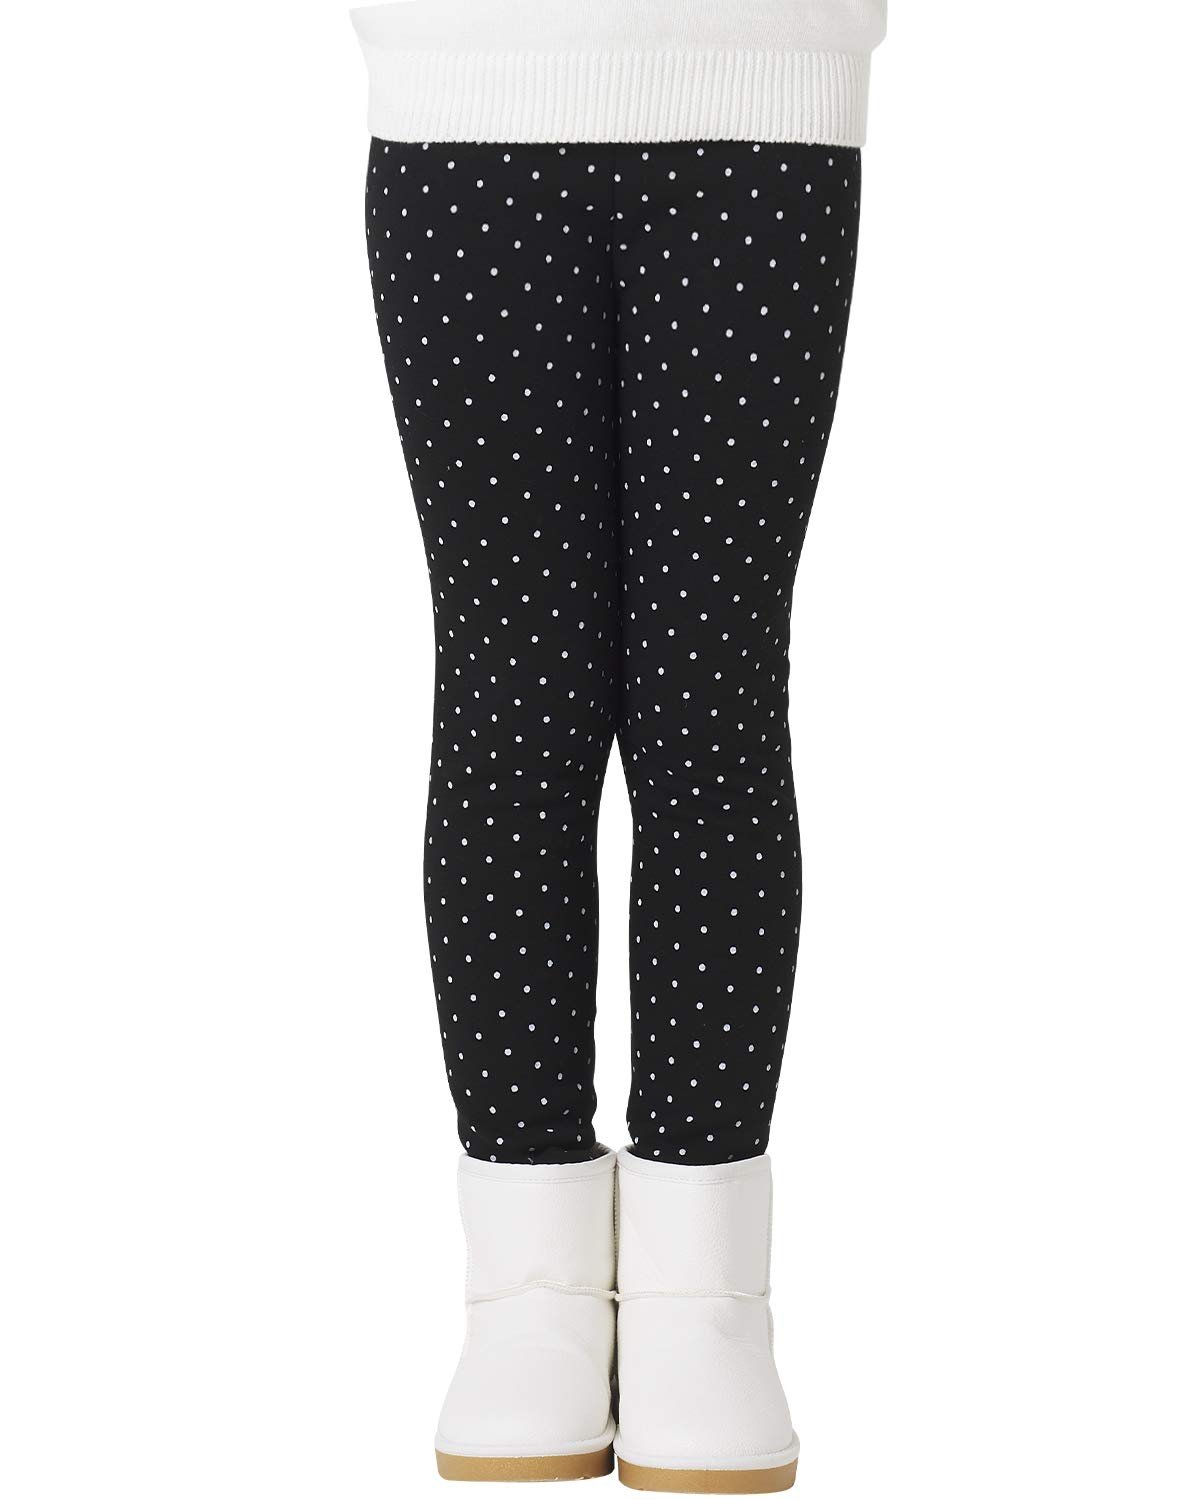 20 X ADOREL GIRLS THERMAL WINTER LEGGINGS FLEECE LINED WARM COTTON TROUSERS BLACK WITH WHITE DOTS 8-9 YEARS (MANUFACTURER SIZE: 150) - TOTAL RRP £218: LOCATION - A RACK